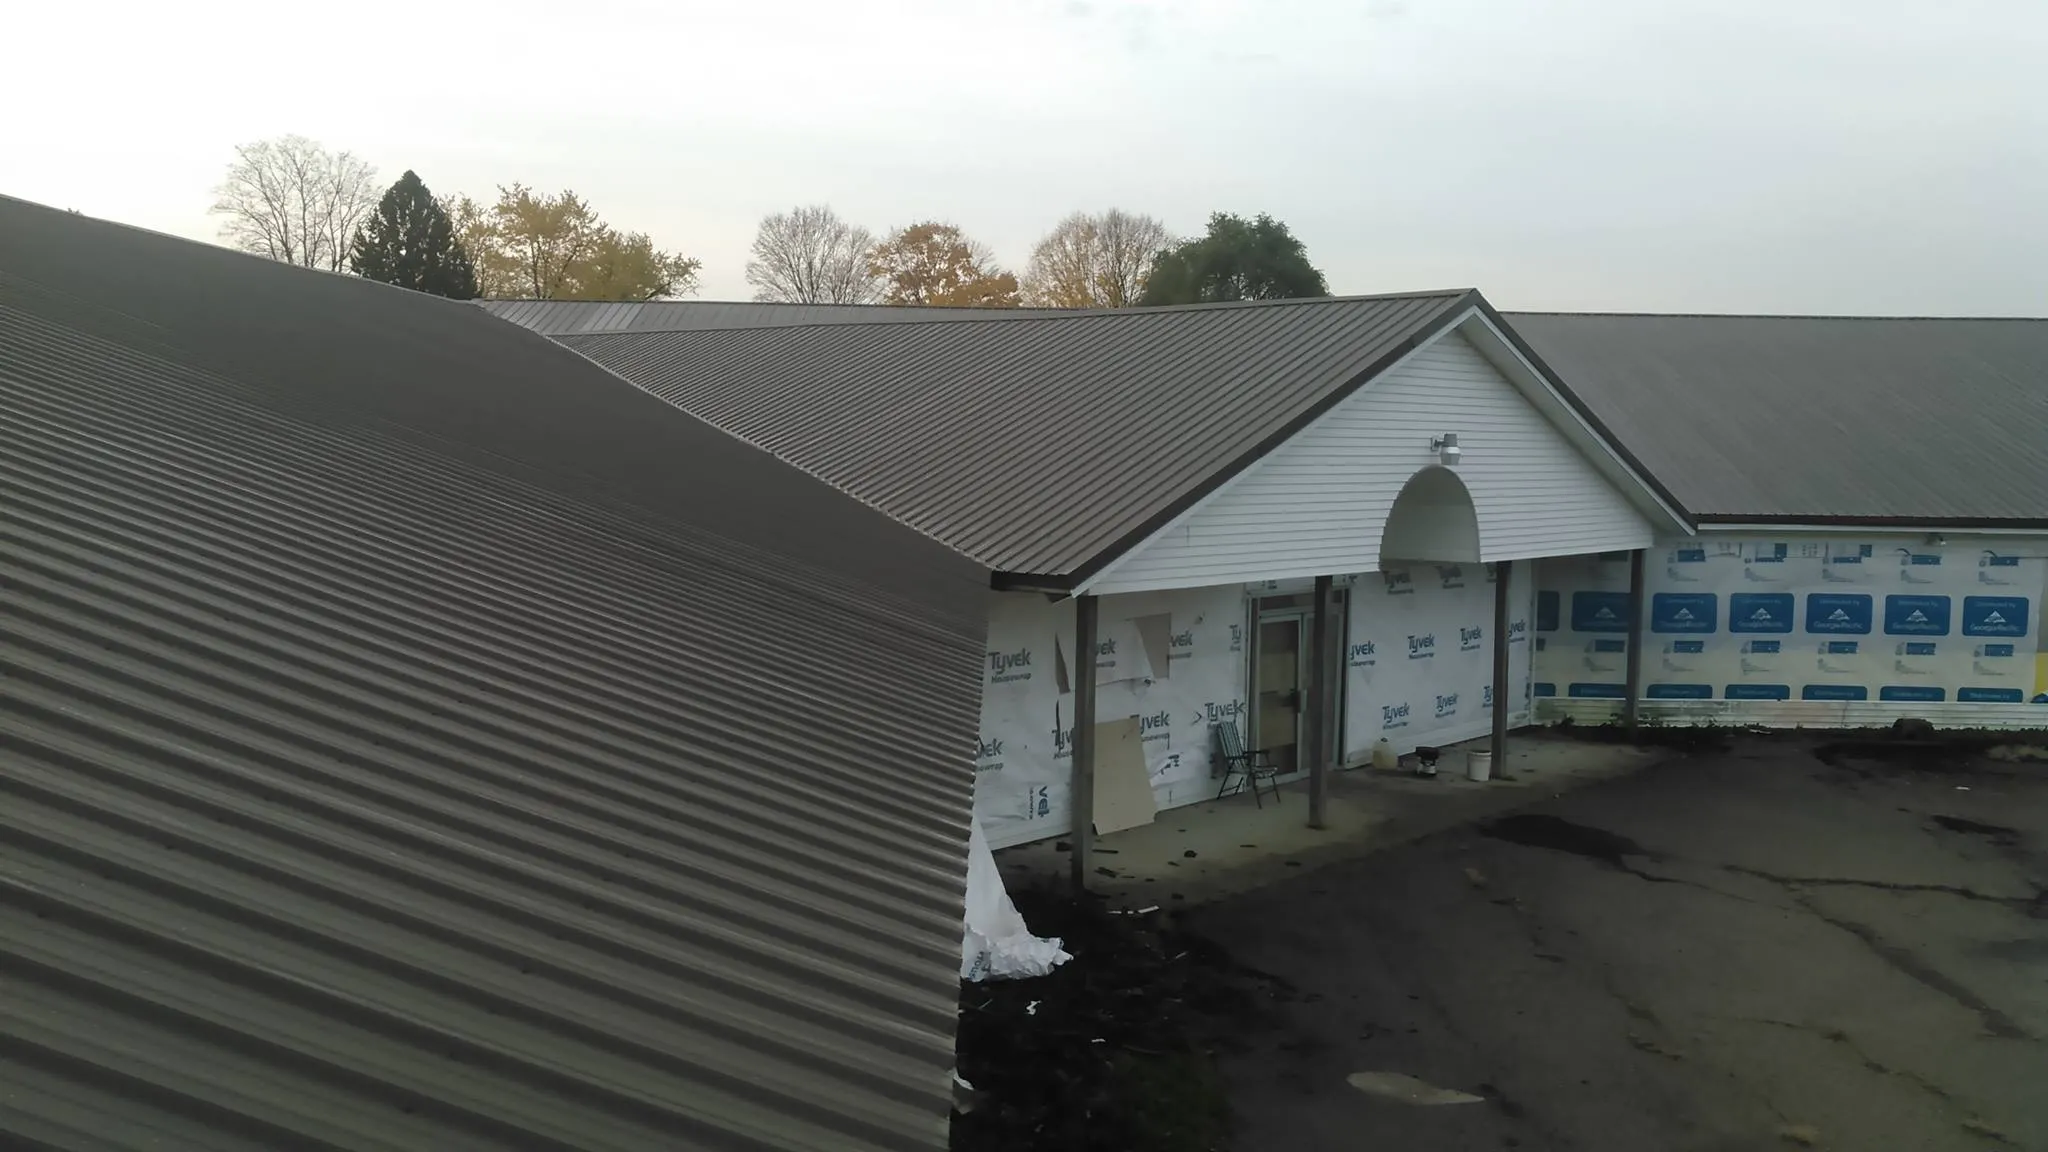 Roof Snow Removal for Squids Roofing Inc in Cutlerville, MI